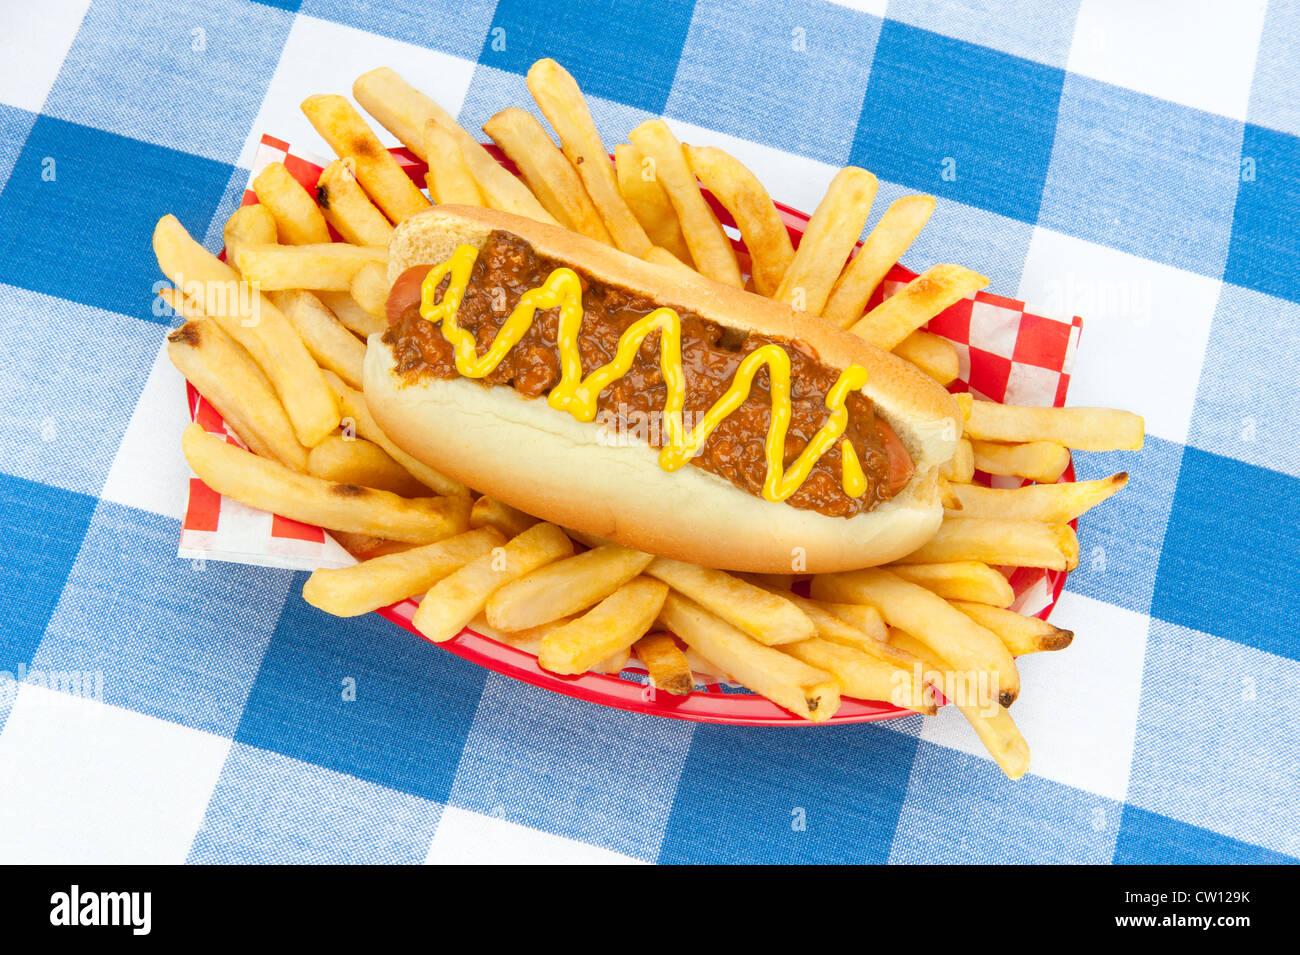 A chilidog with mustard in a basket of fresh French fries on a blue and white checkered tablecloth. Stock Photo